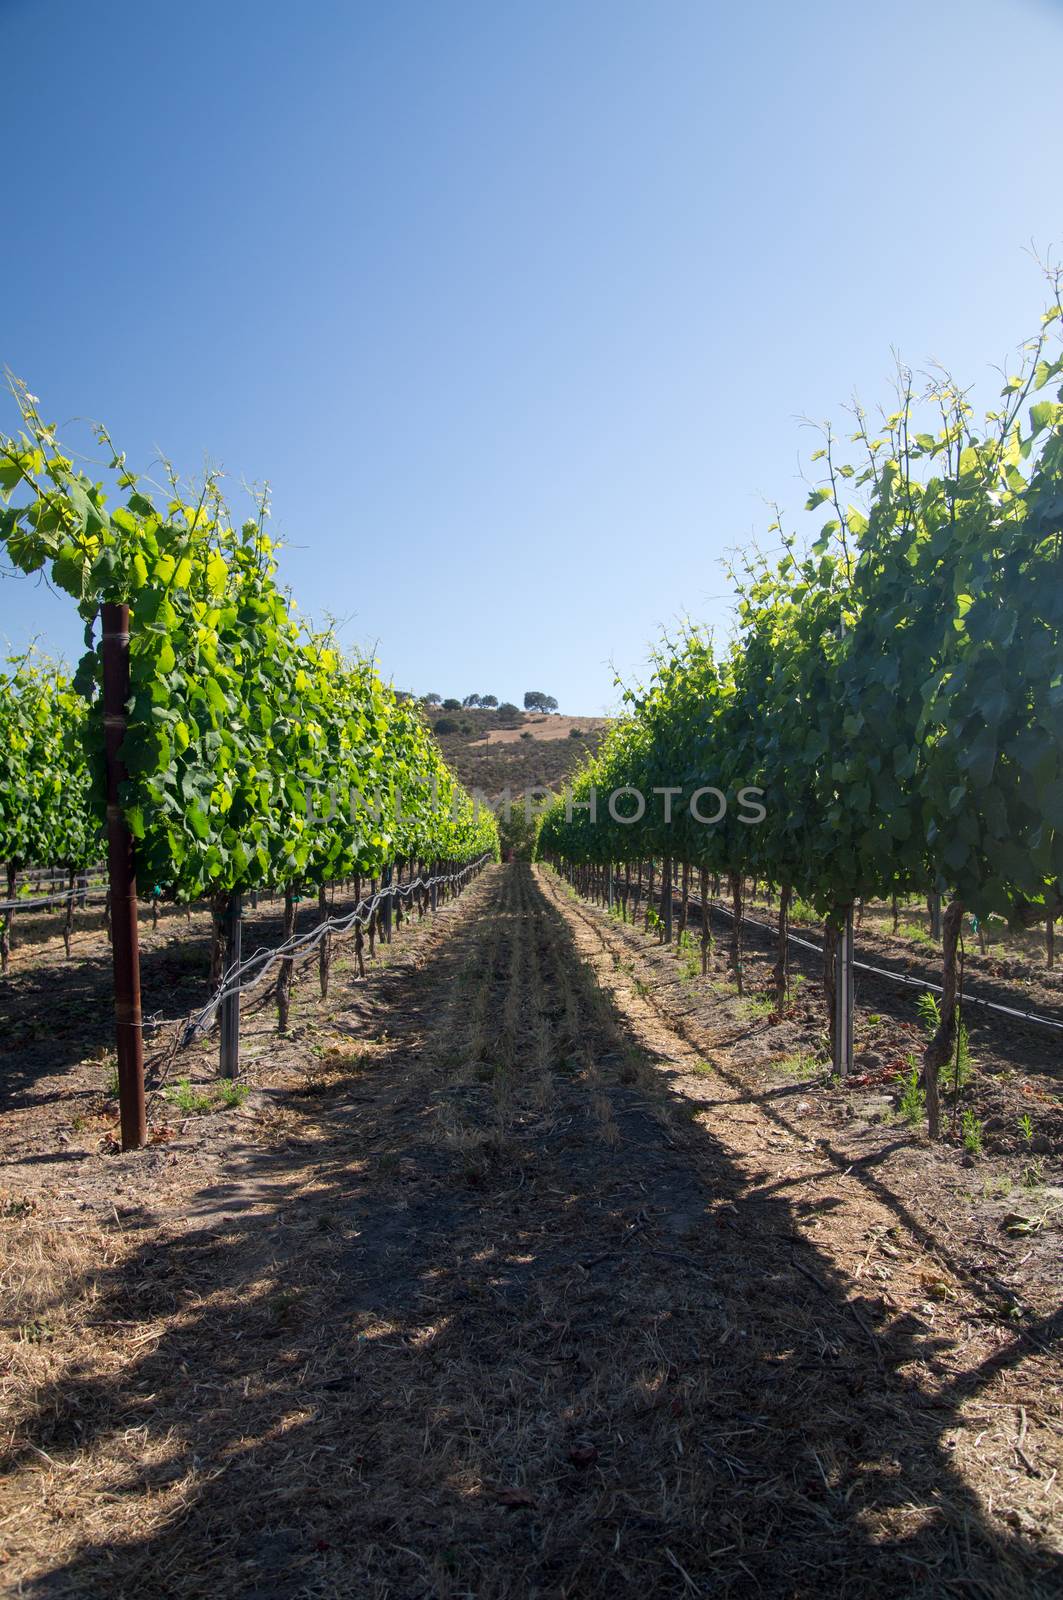 Row of grapevines in Summer sun by emattil